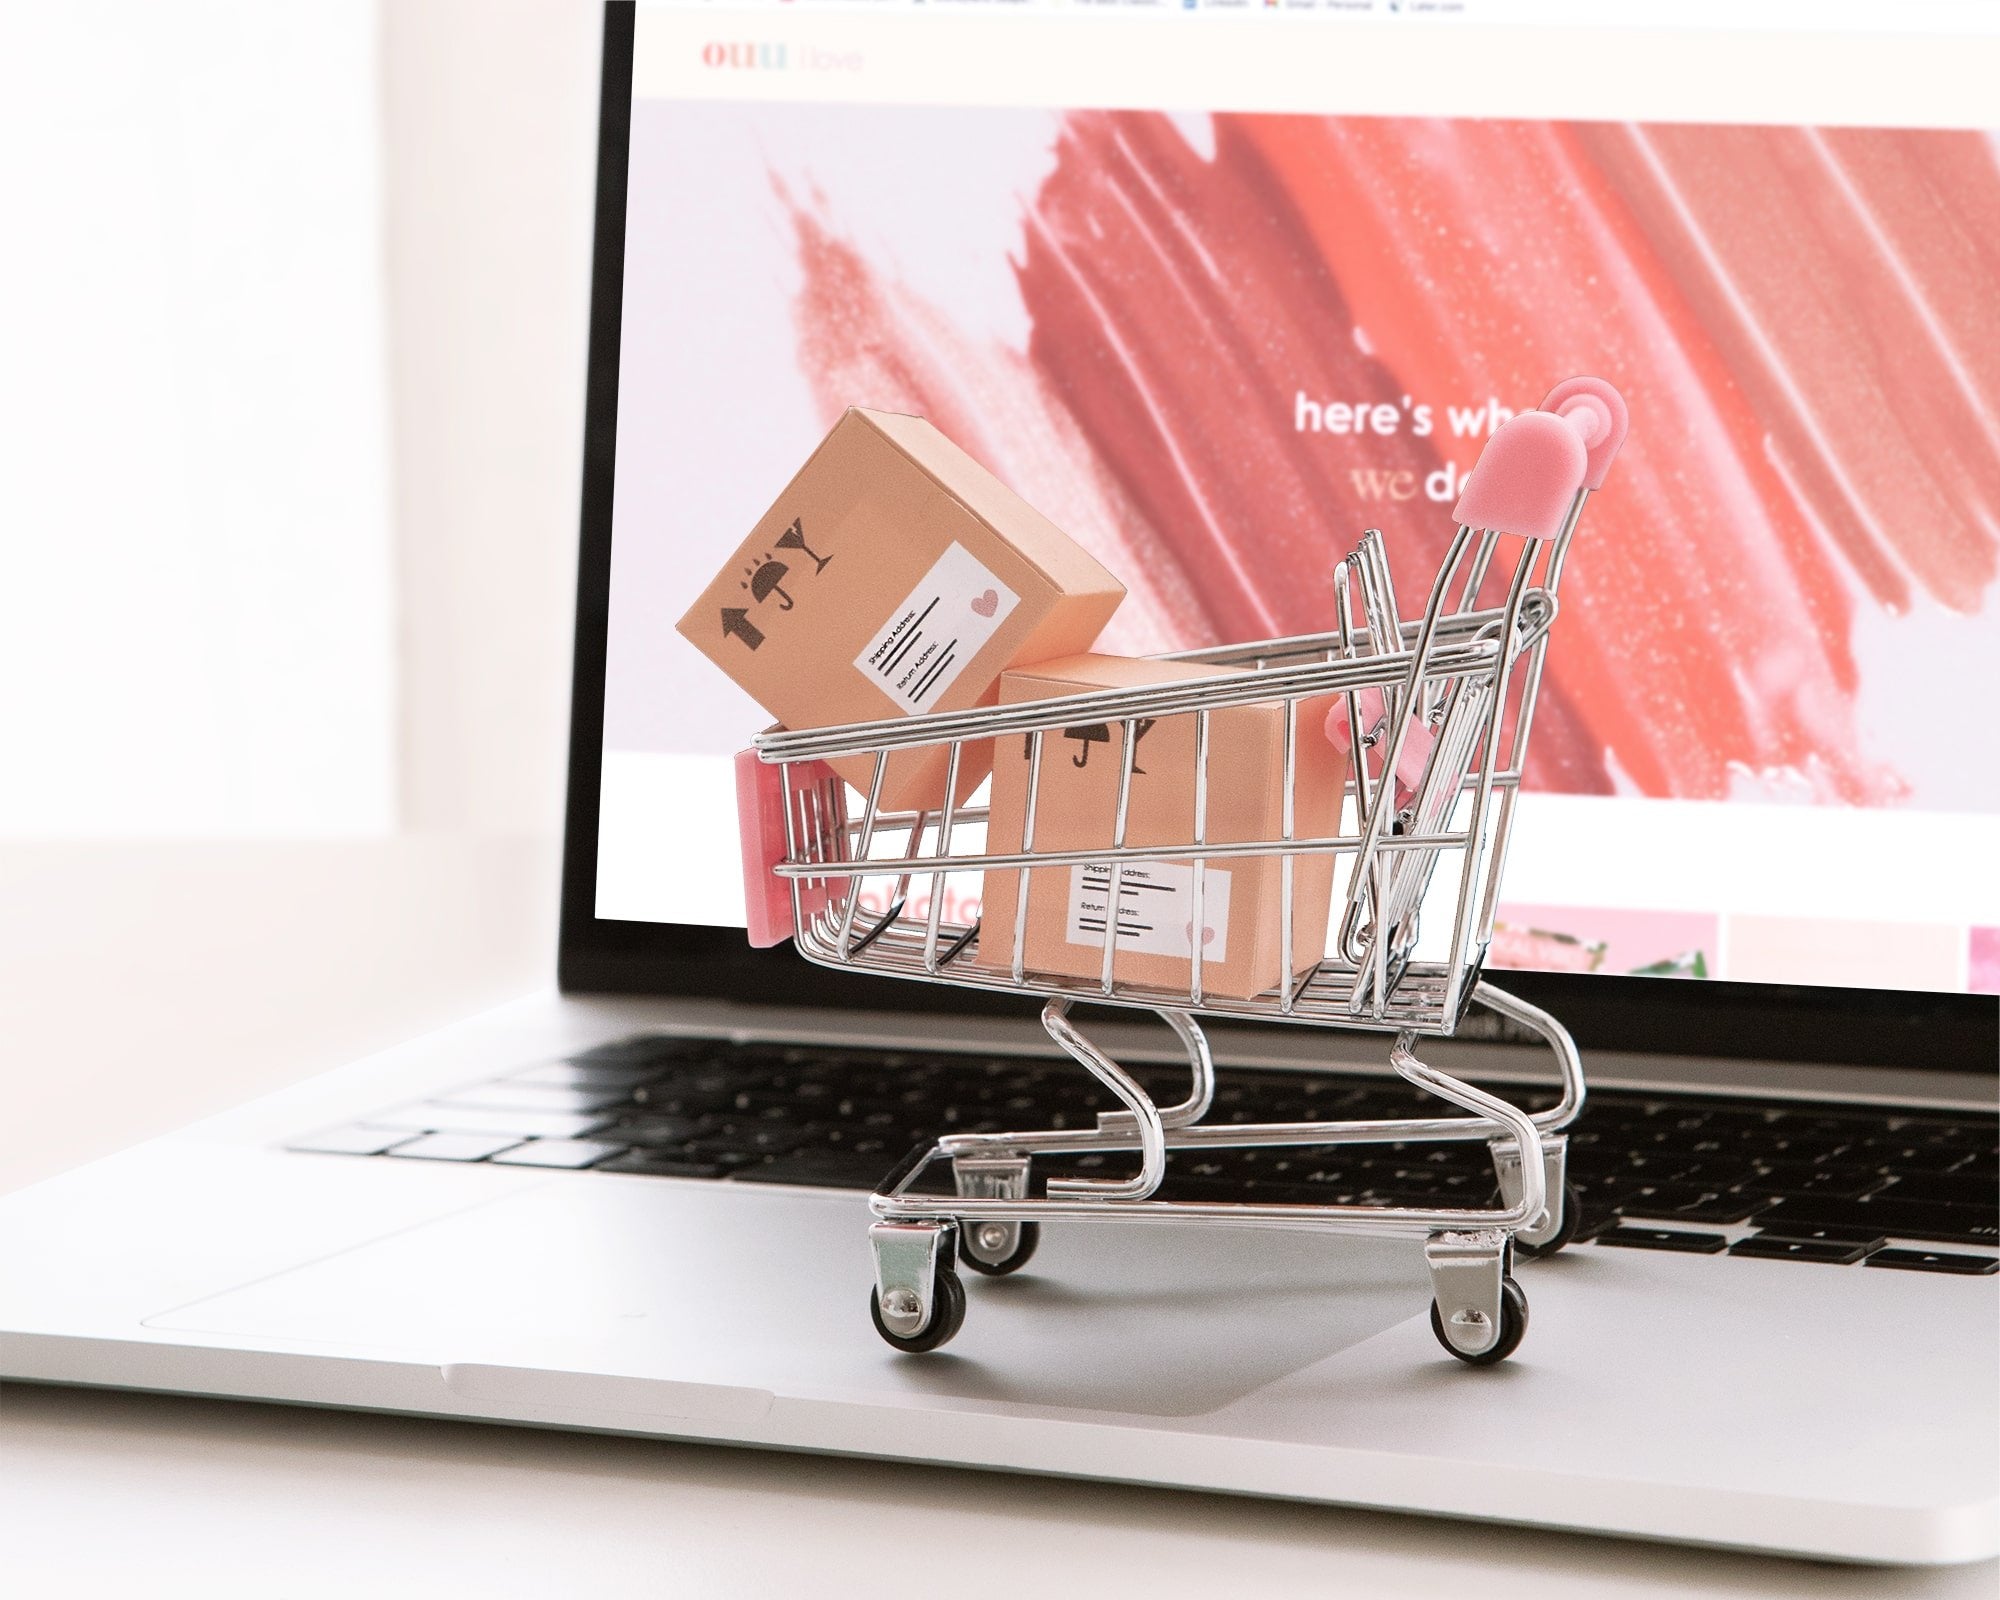 Want to Open an Online Store? Here are 5 Things to Consider.